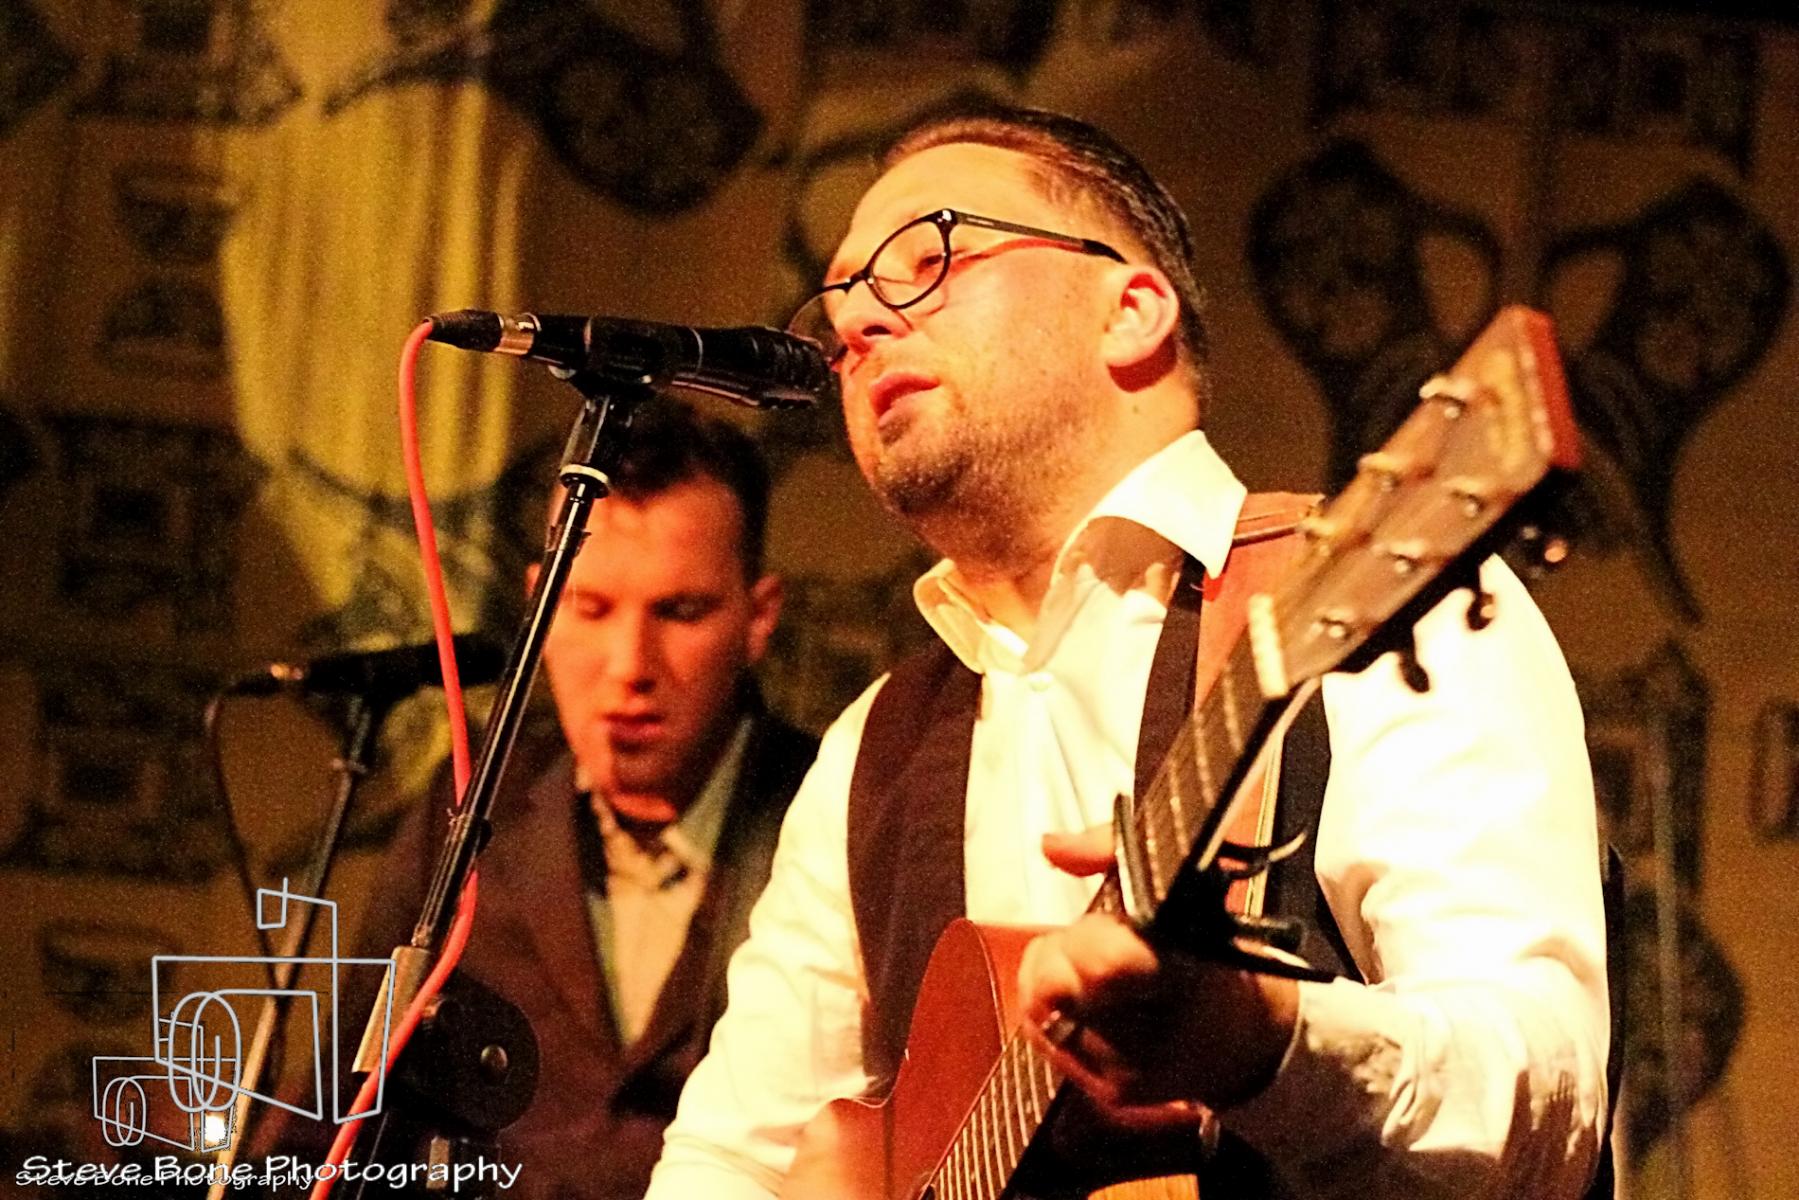 Rod Fisher + Dave Khan - The Three Bees - The Black Tie Event - Wine Cellar - 23rd May 2013